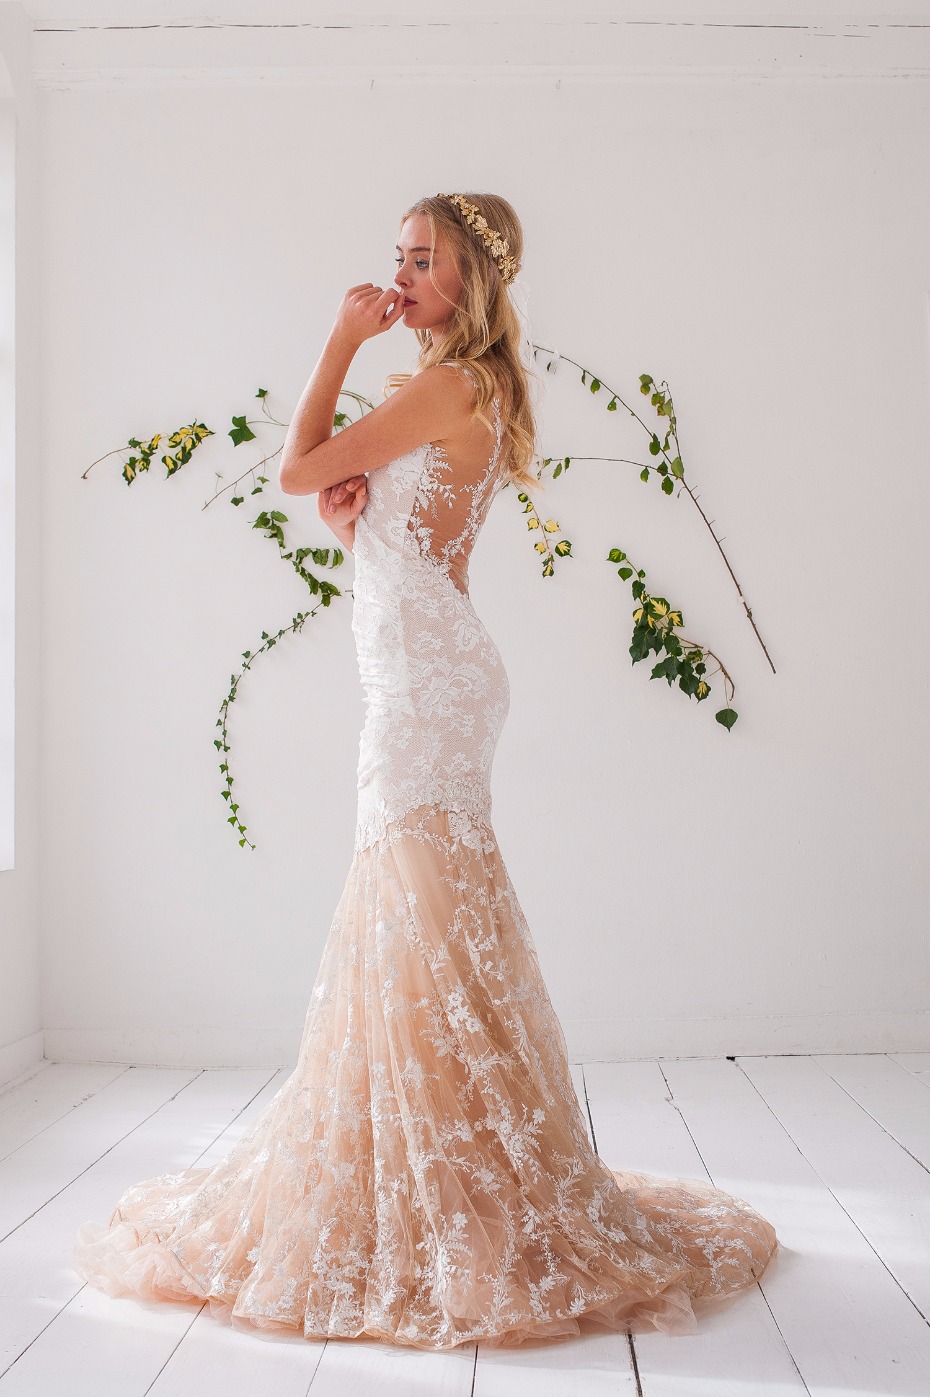 Two toned lace gown from Olvi's